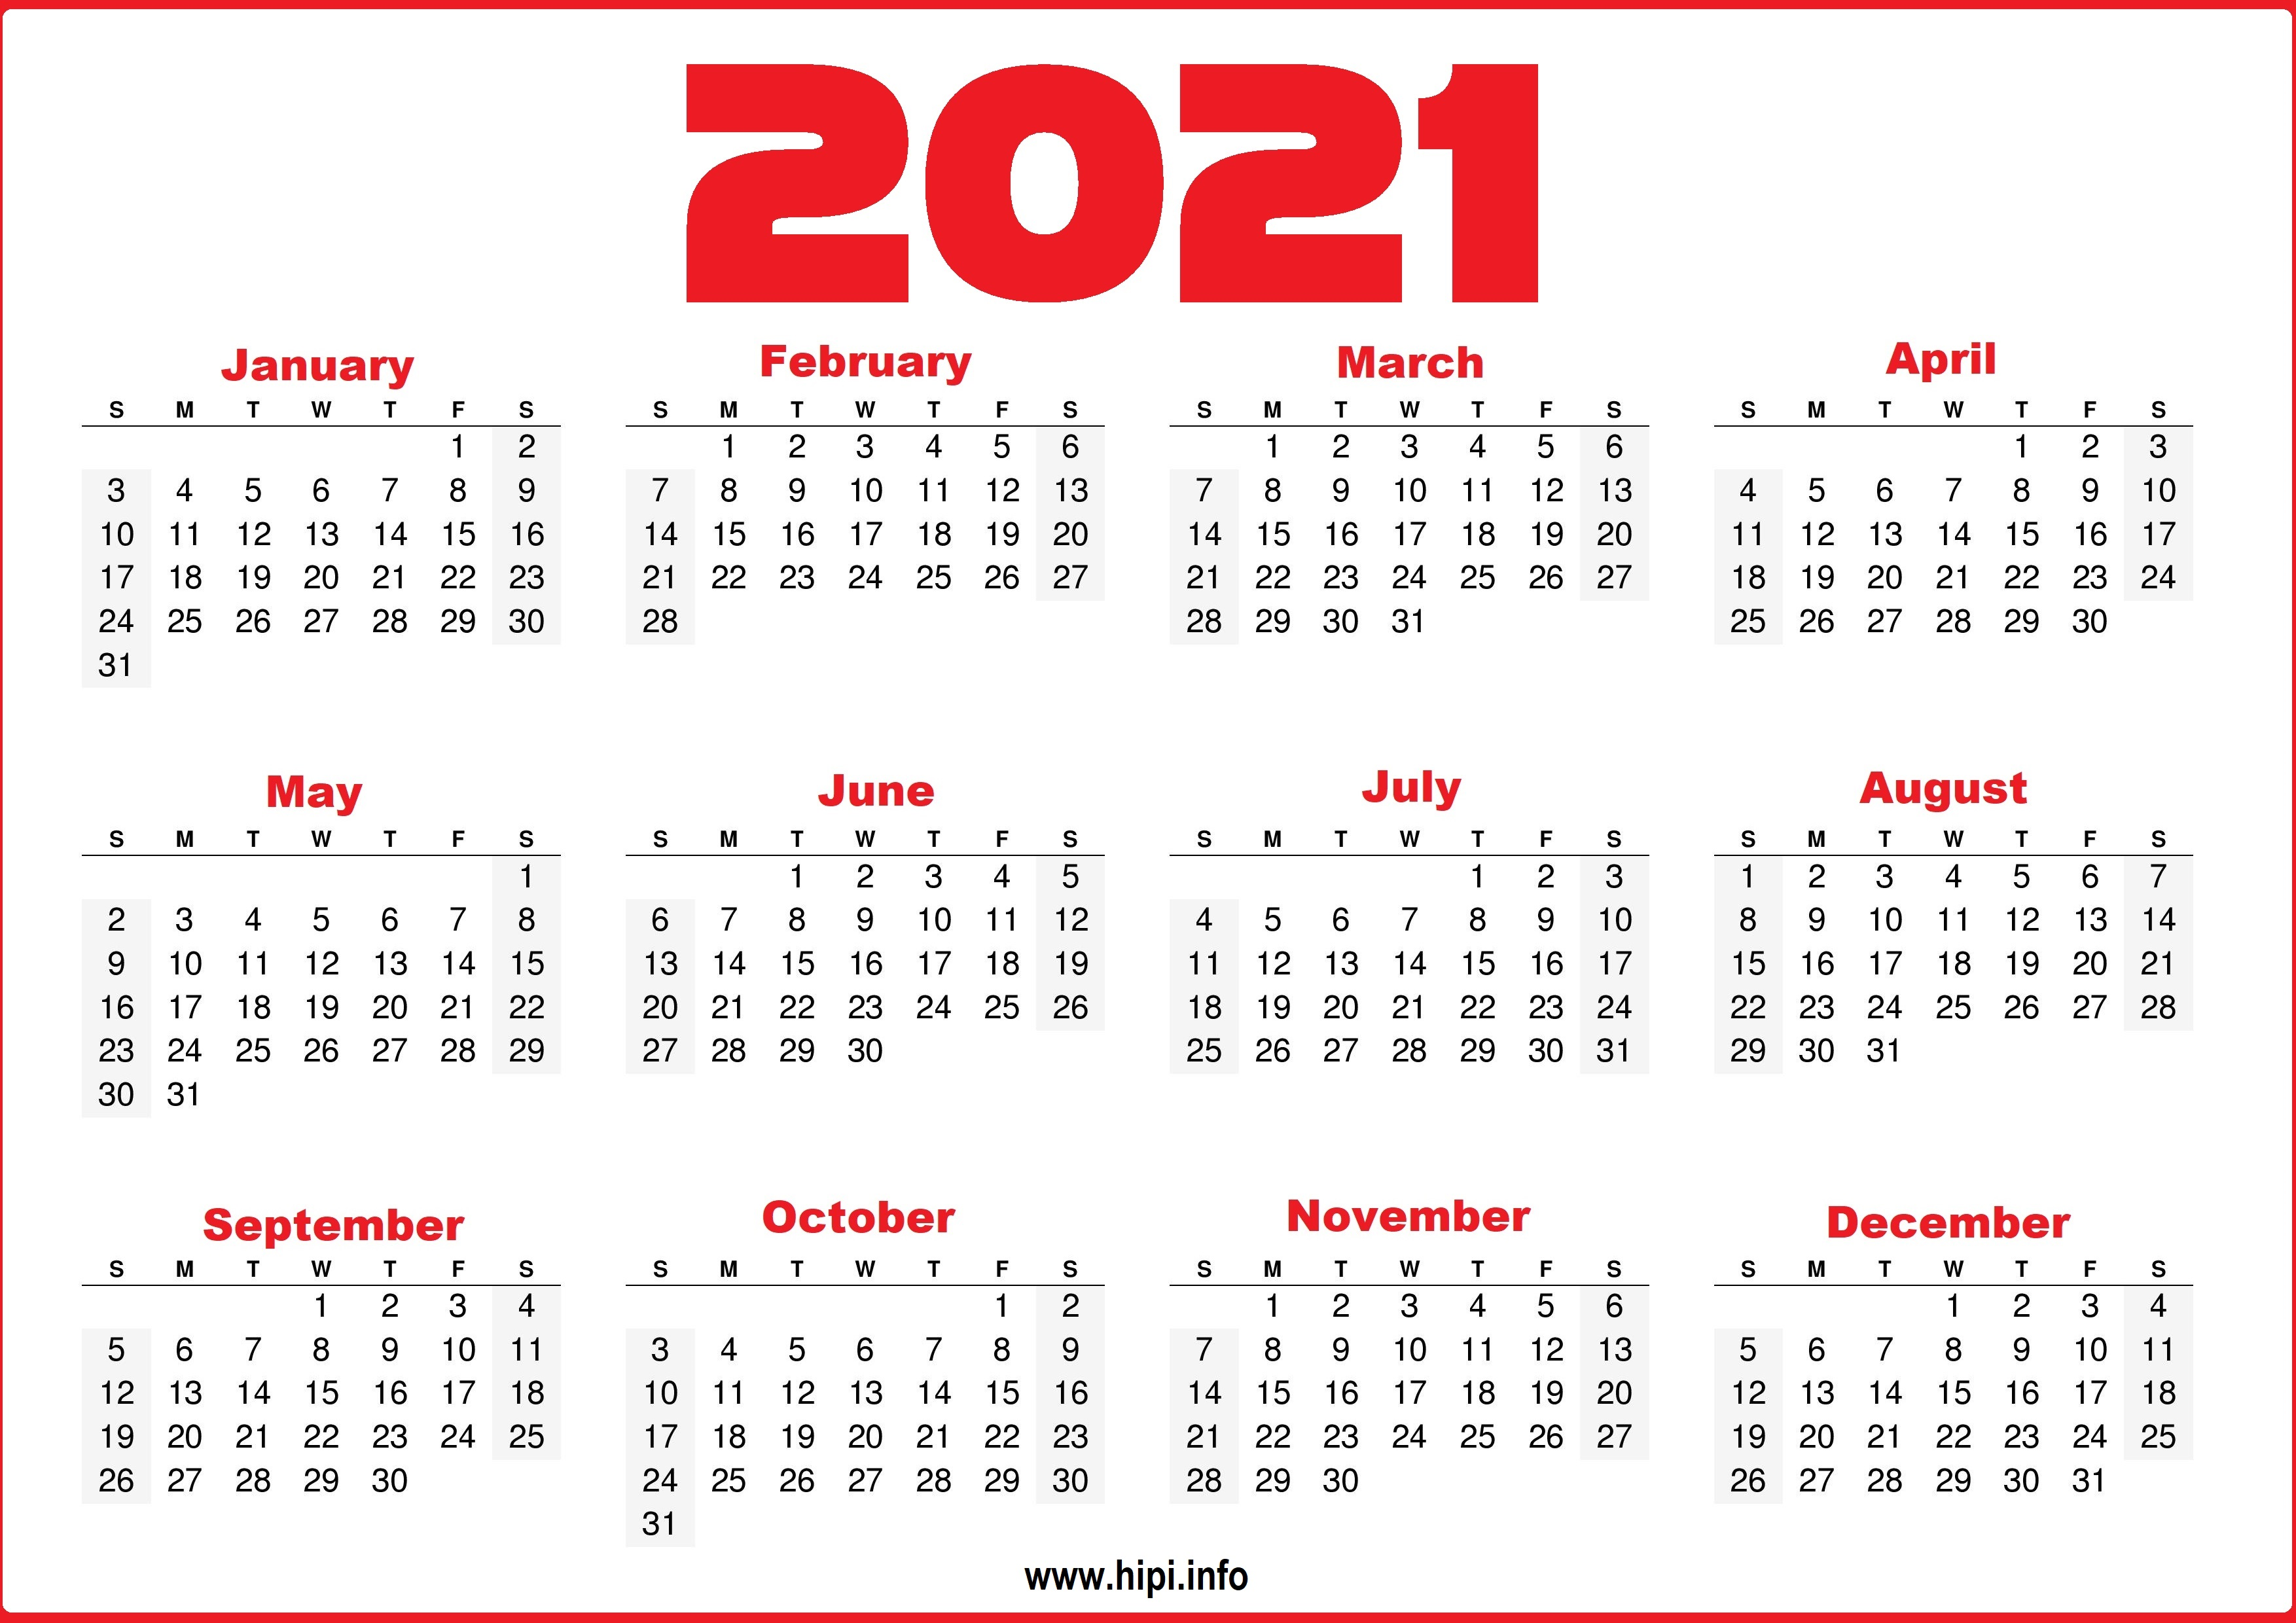 2021 Yearly Calendar Printable - Customize and Print